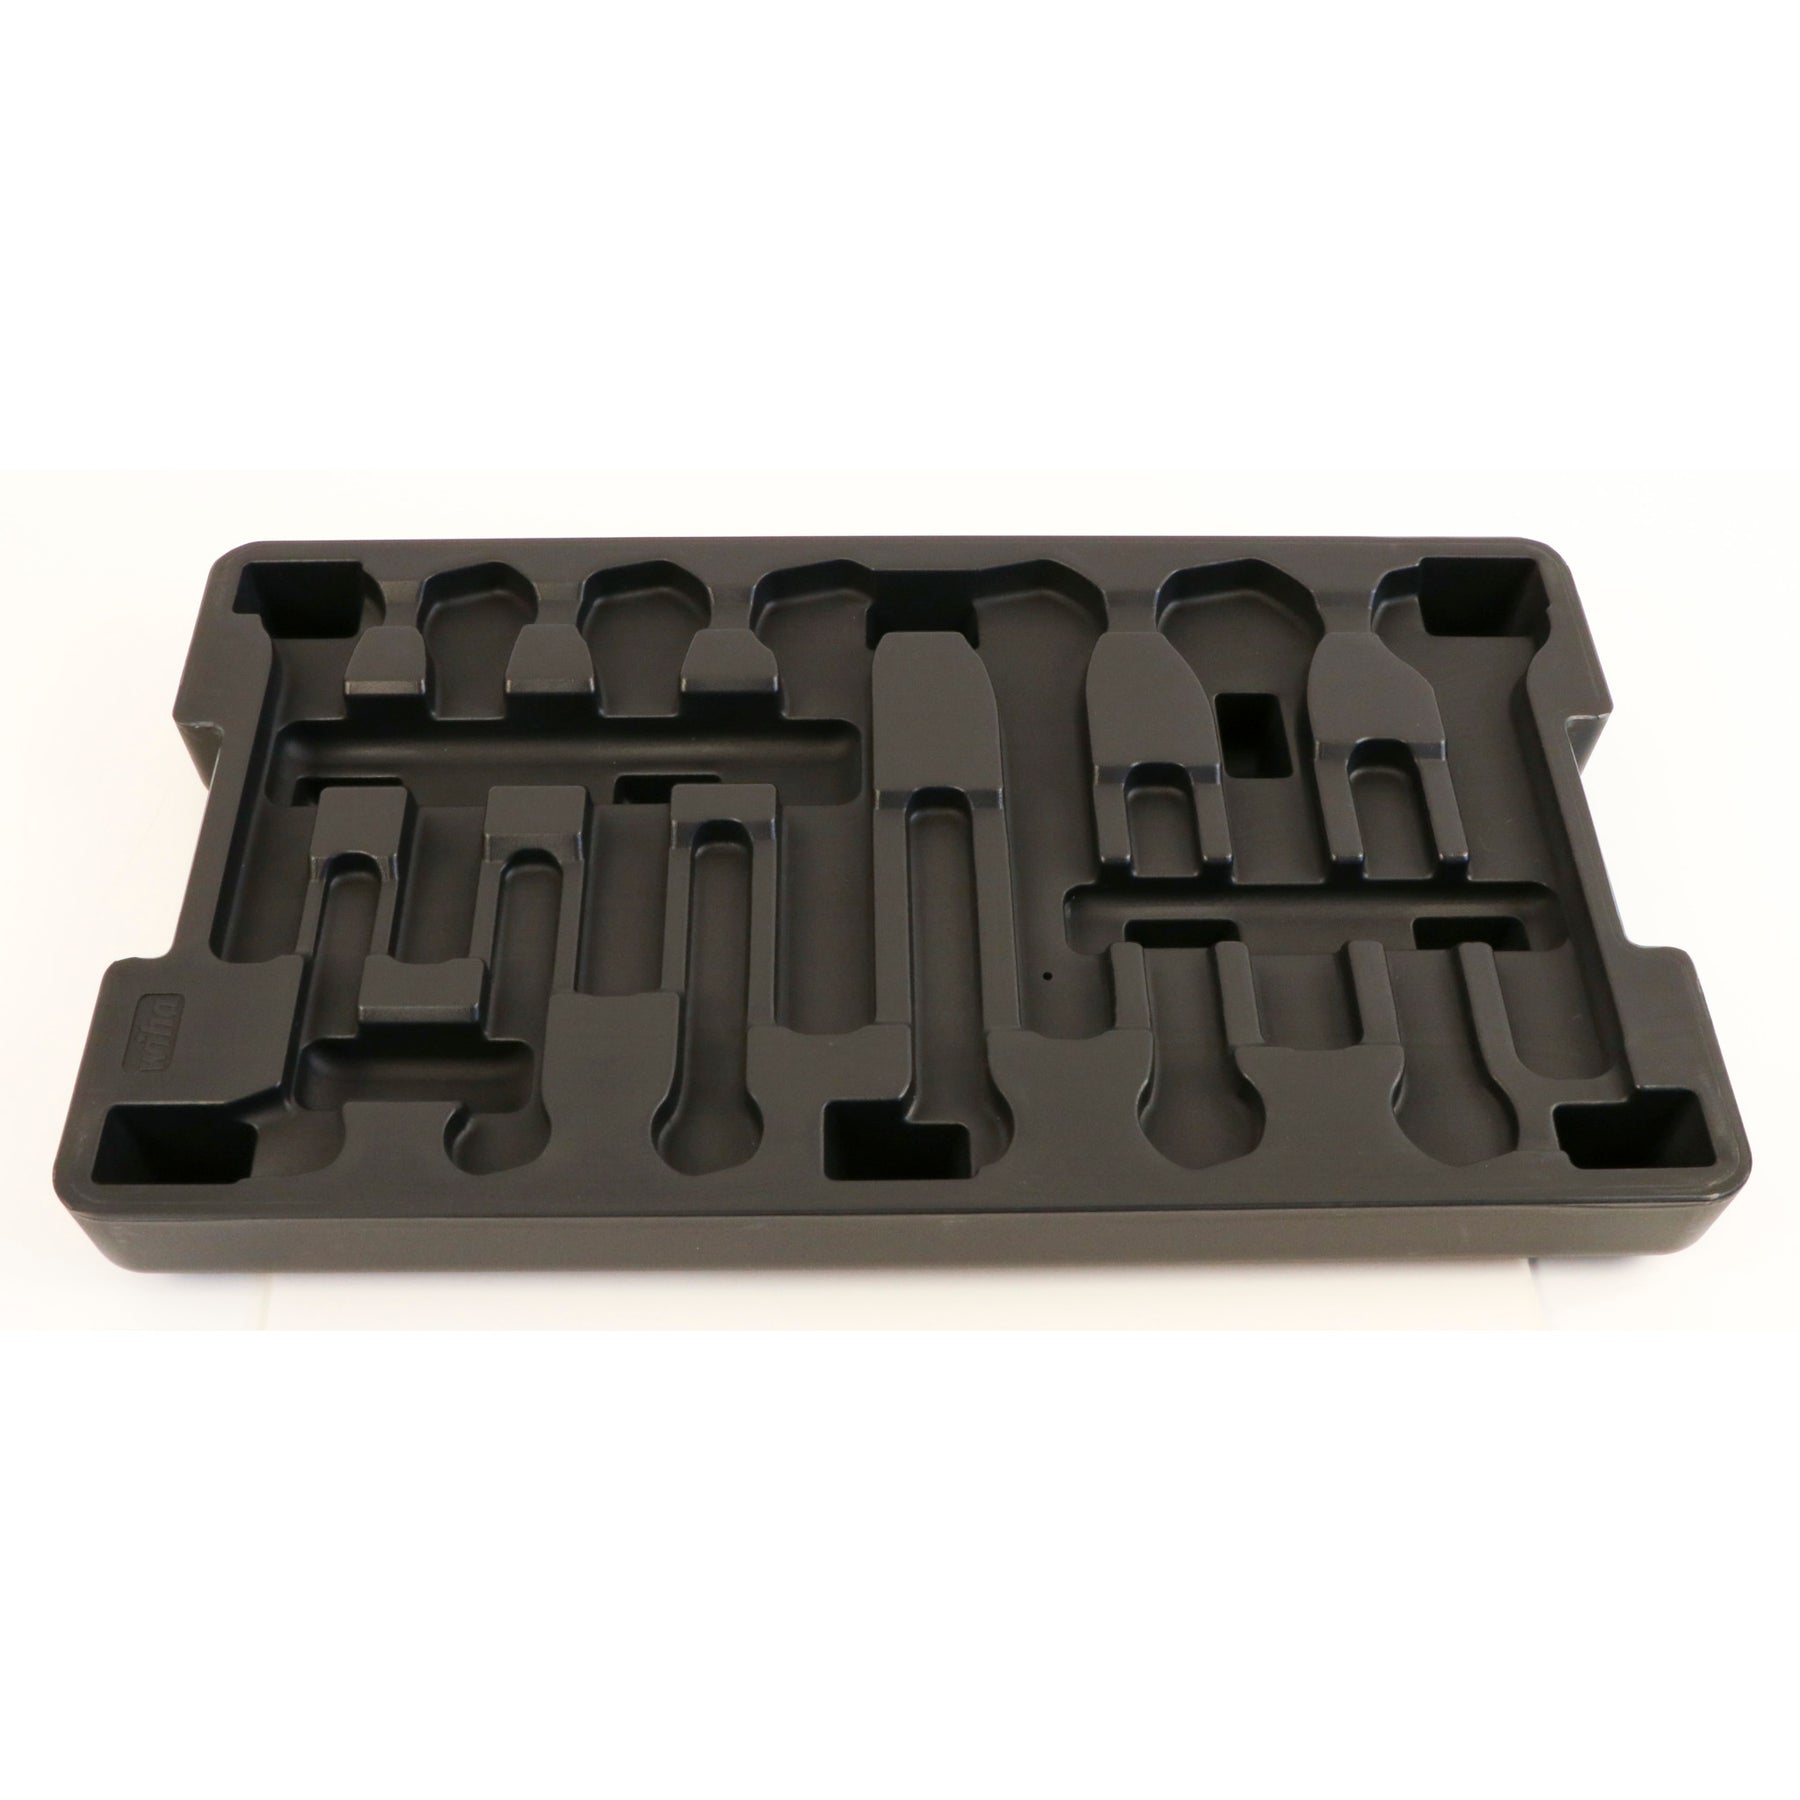 Molded Tray for Insulated Spanners